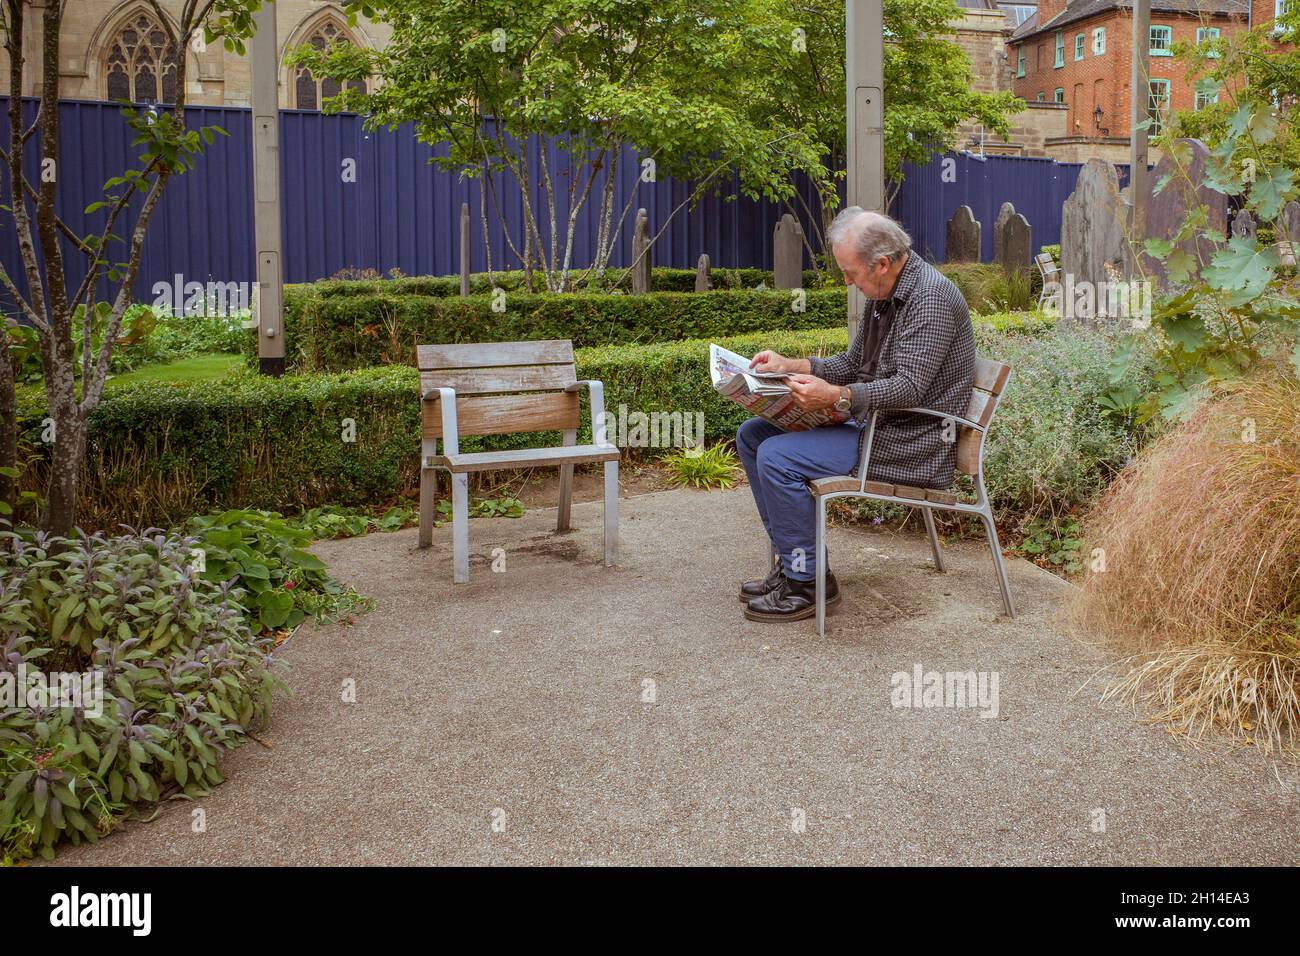 A man sits reading a newspaper in a public space by a cemetery. The chair next to him is conceptually a space for absent friends. Stock Photo